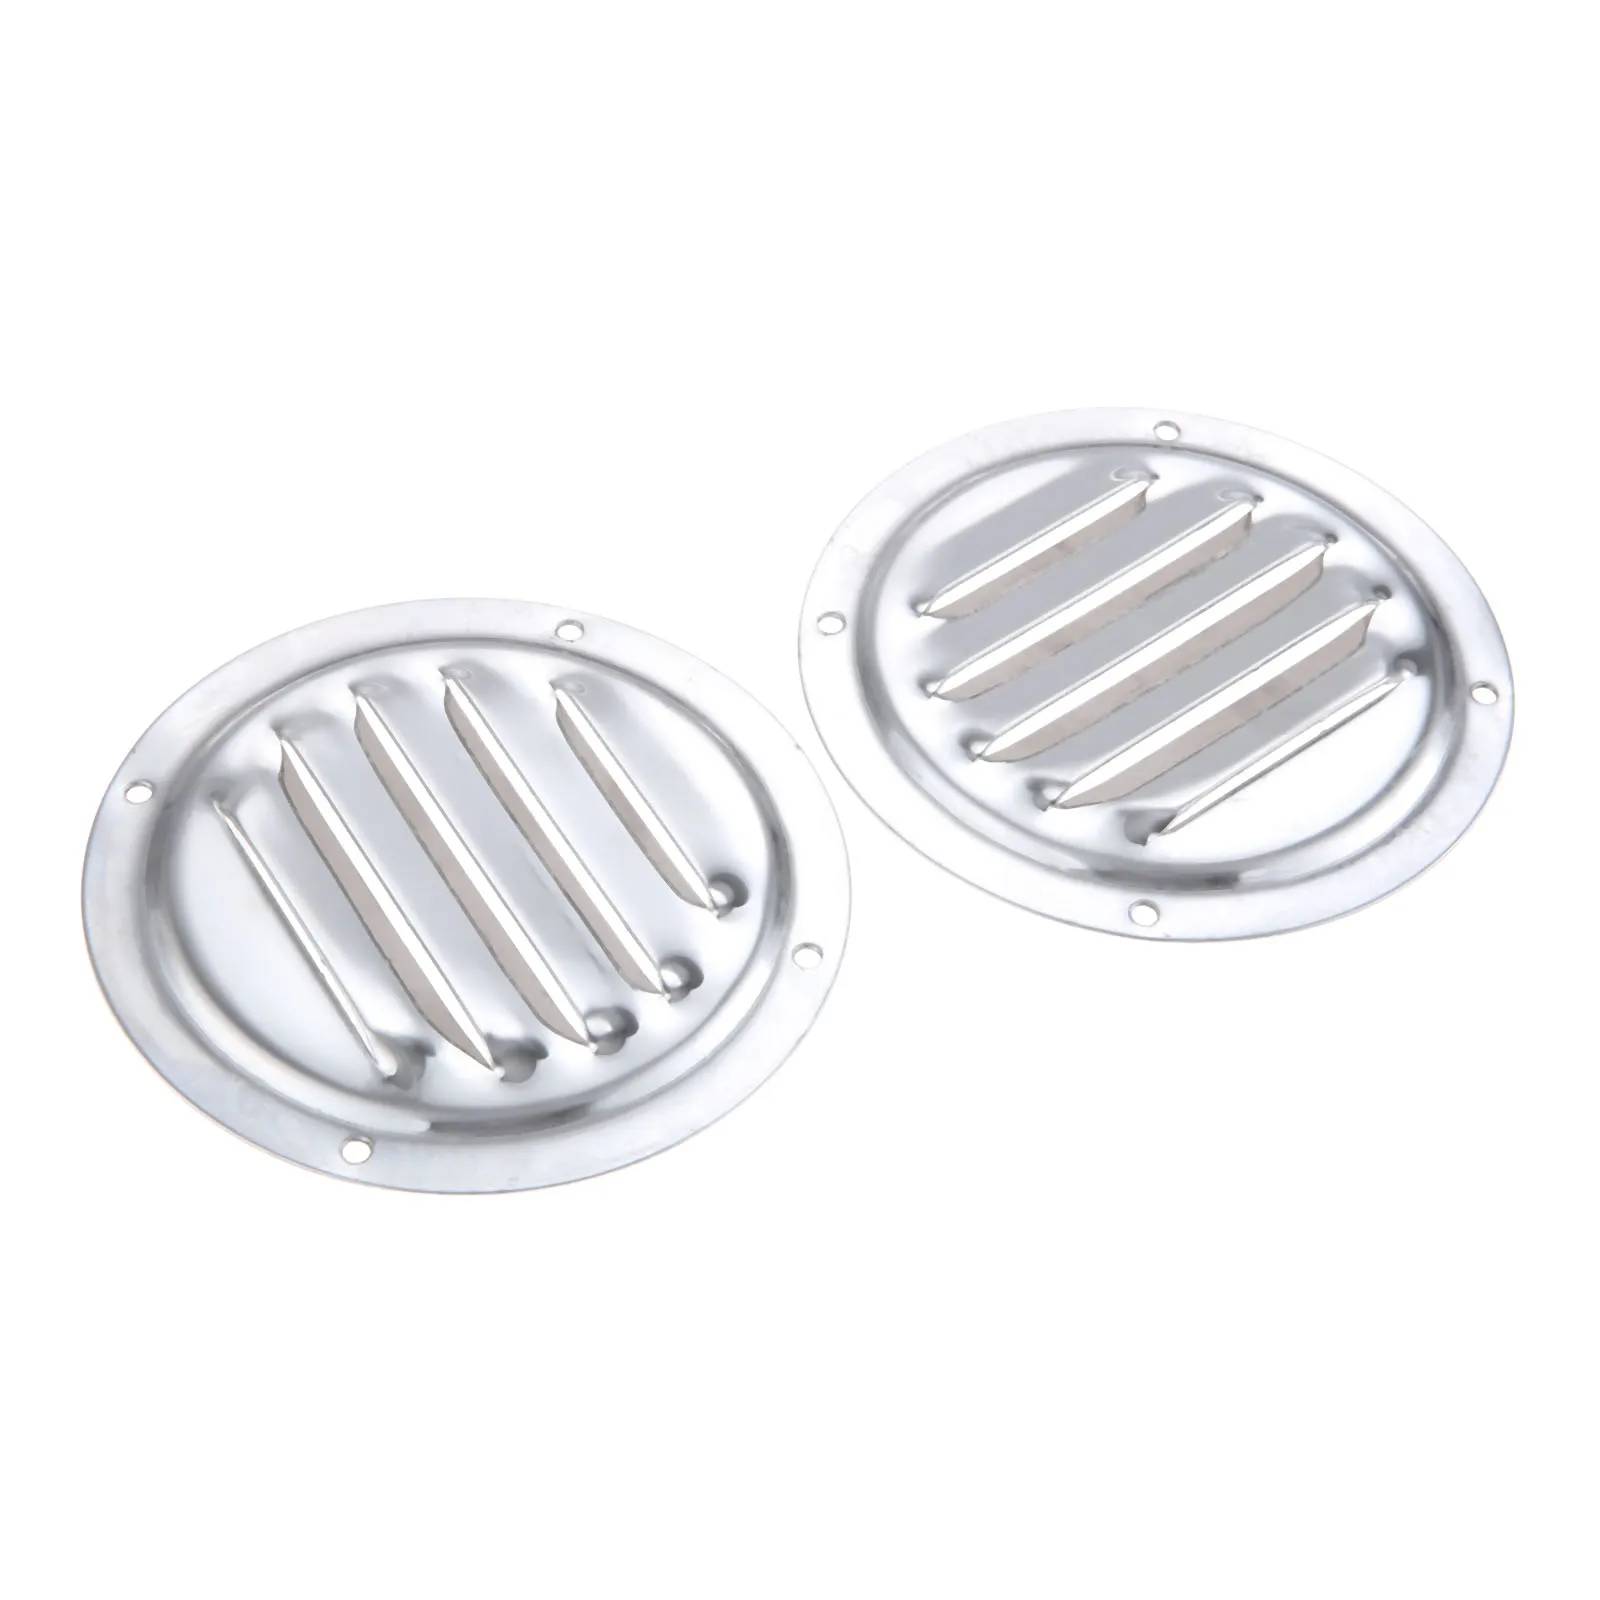 

2 Pcs 4in/100mm Marine Stainless Steel Round Louvered Air Vent Grill Cover Louver Ventilation Ventilator Grille Cover Boat Yacht